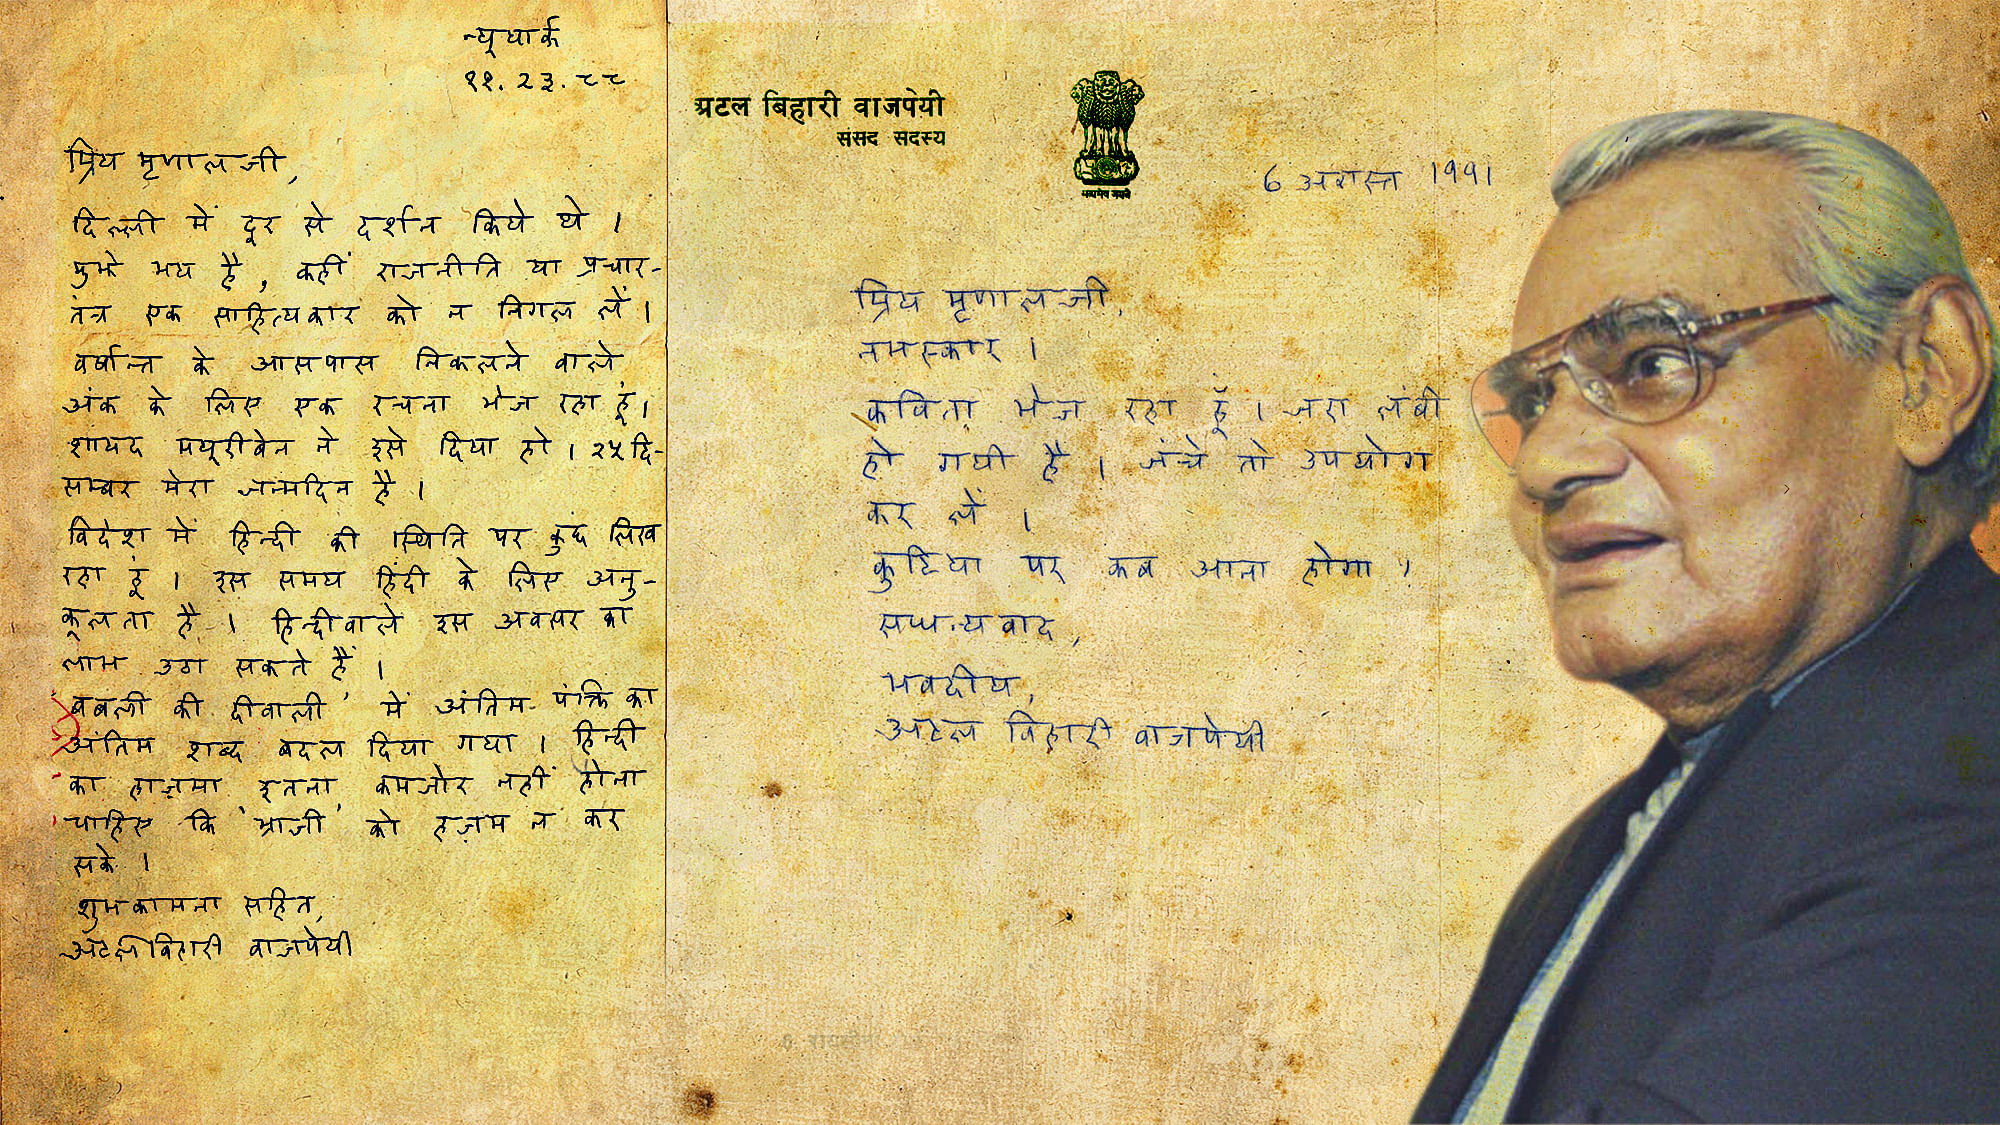 Letters written to Mrinal Pande by former PM Atal Bihari Vajpayee. (Photo: <b>The Quint</b>)